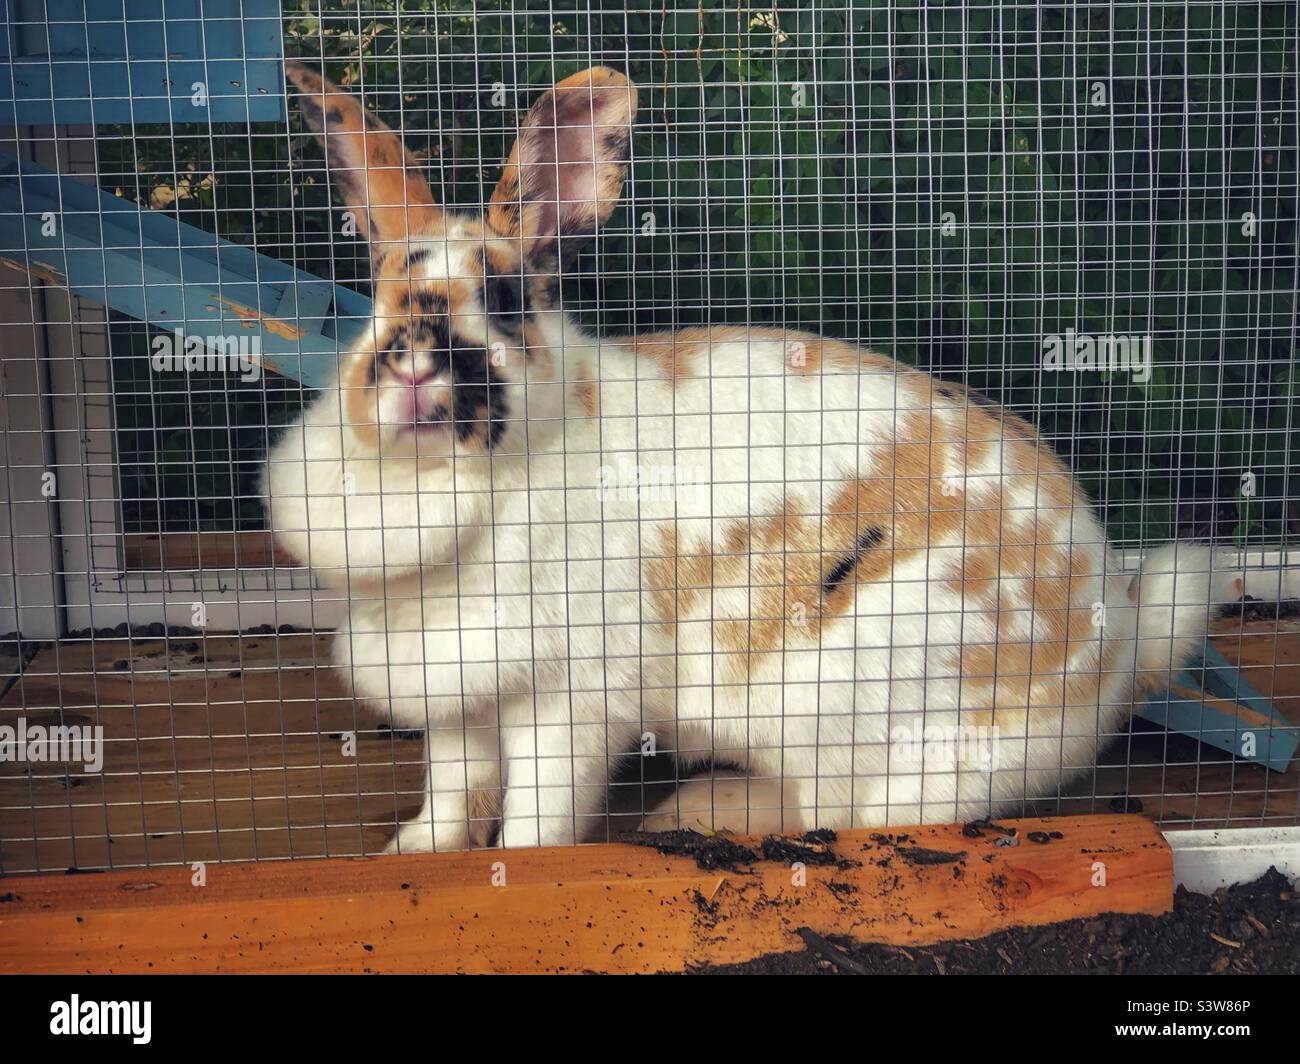 Big bunny in a cage Stock Photo